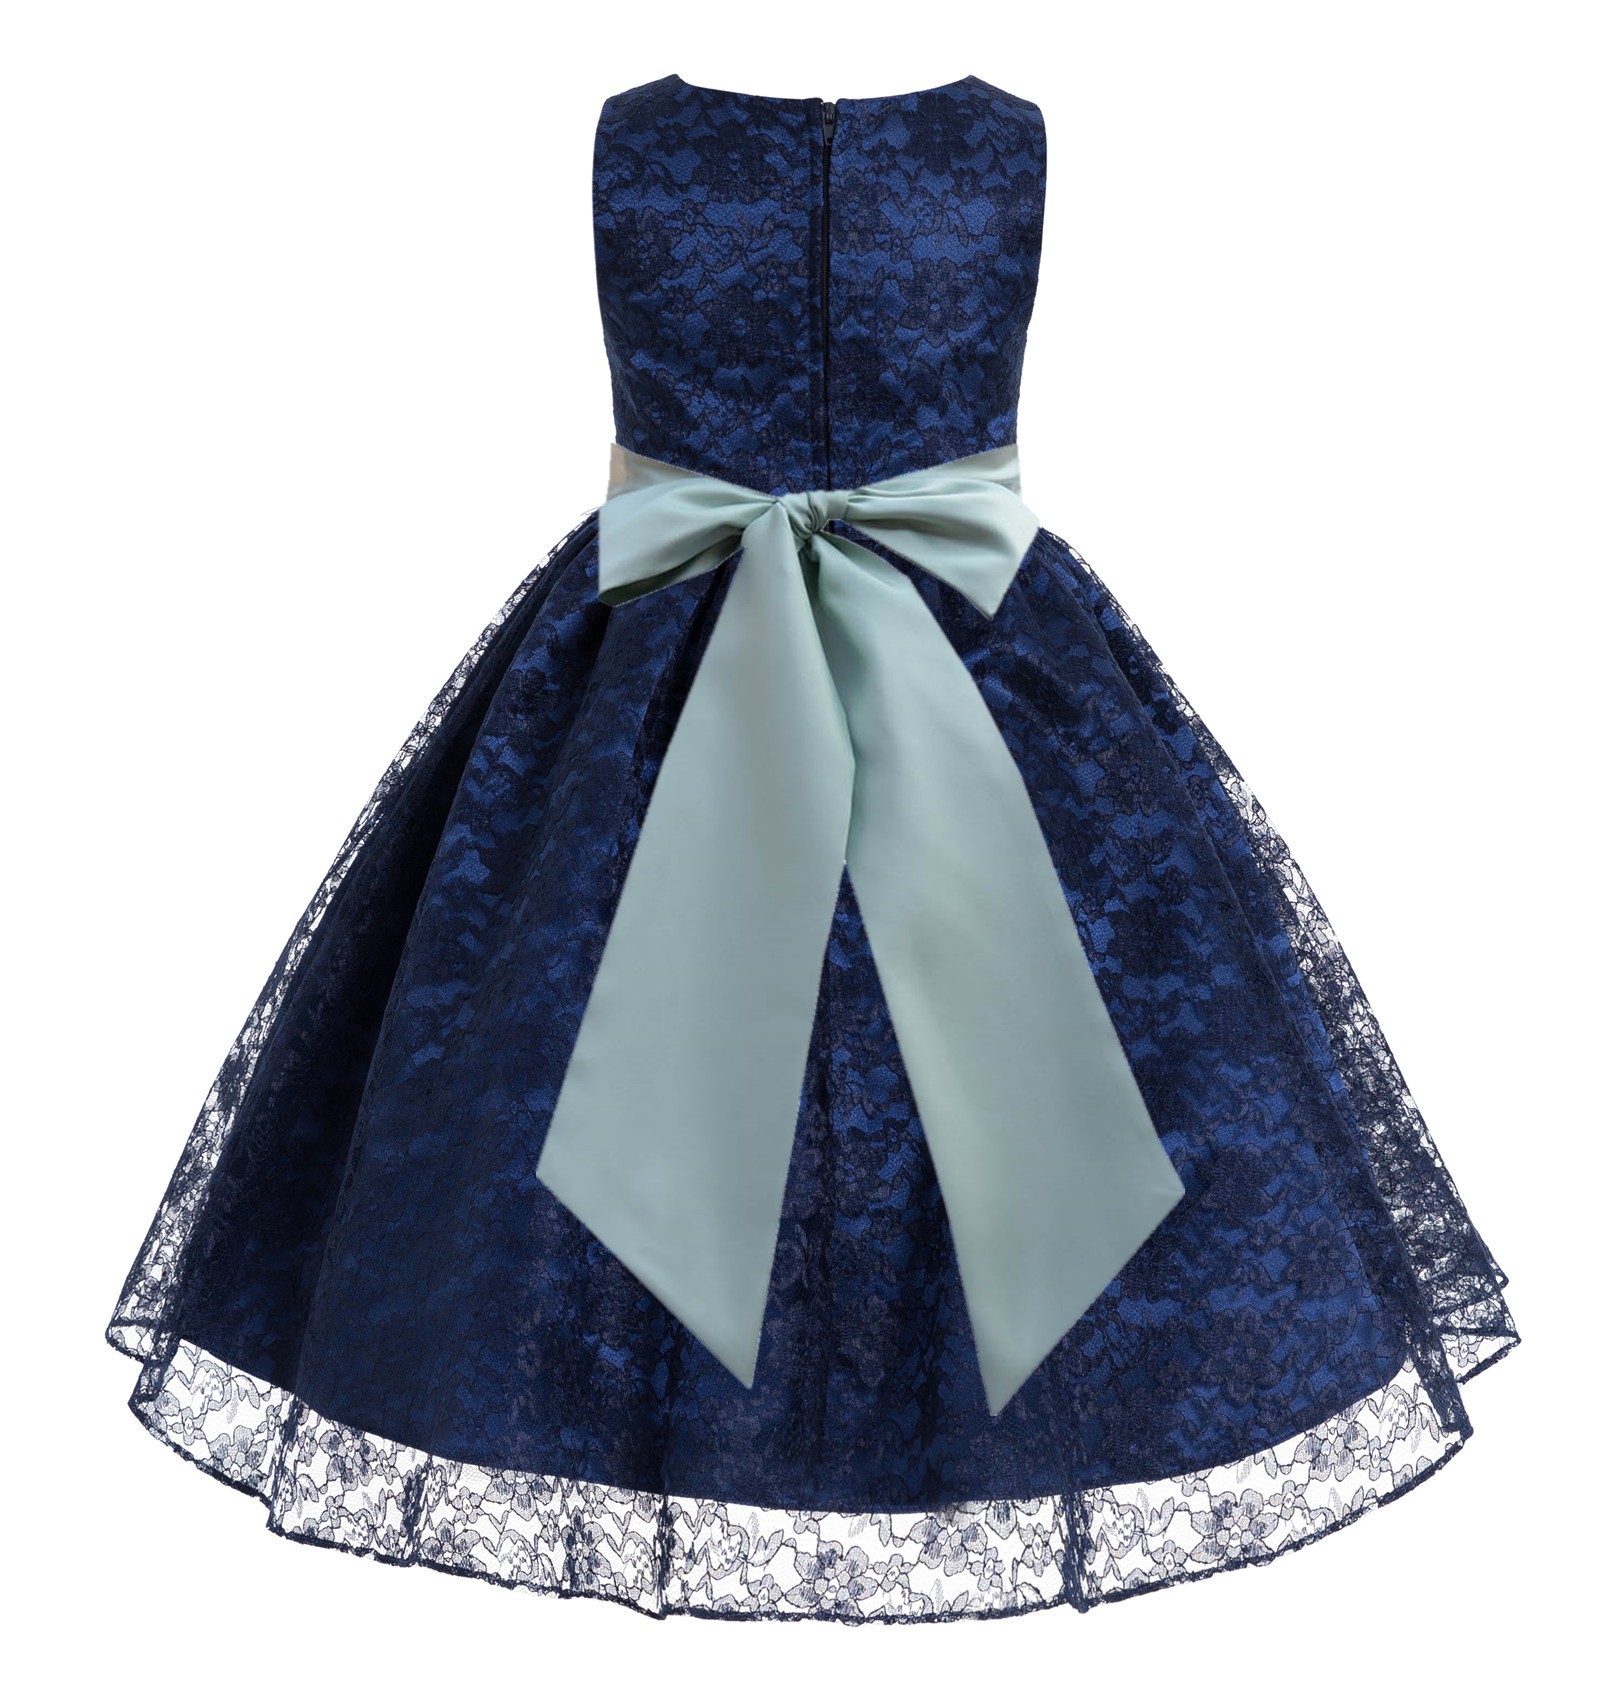 Navy / Sage Floral Lace Overlay Flower Girl Dress Lace Dresses 163s